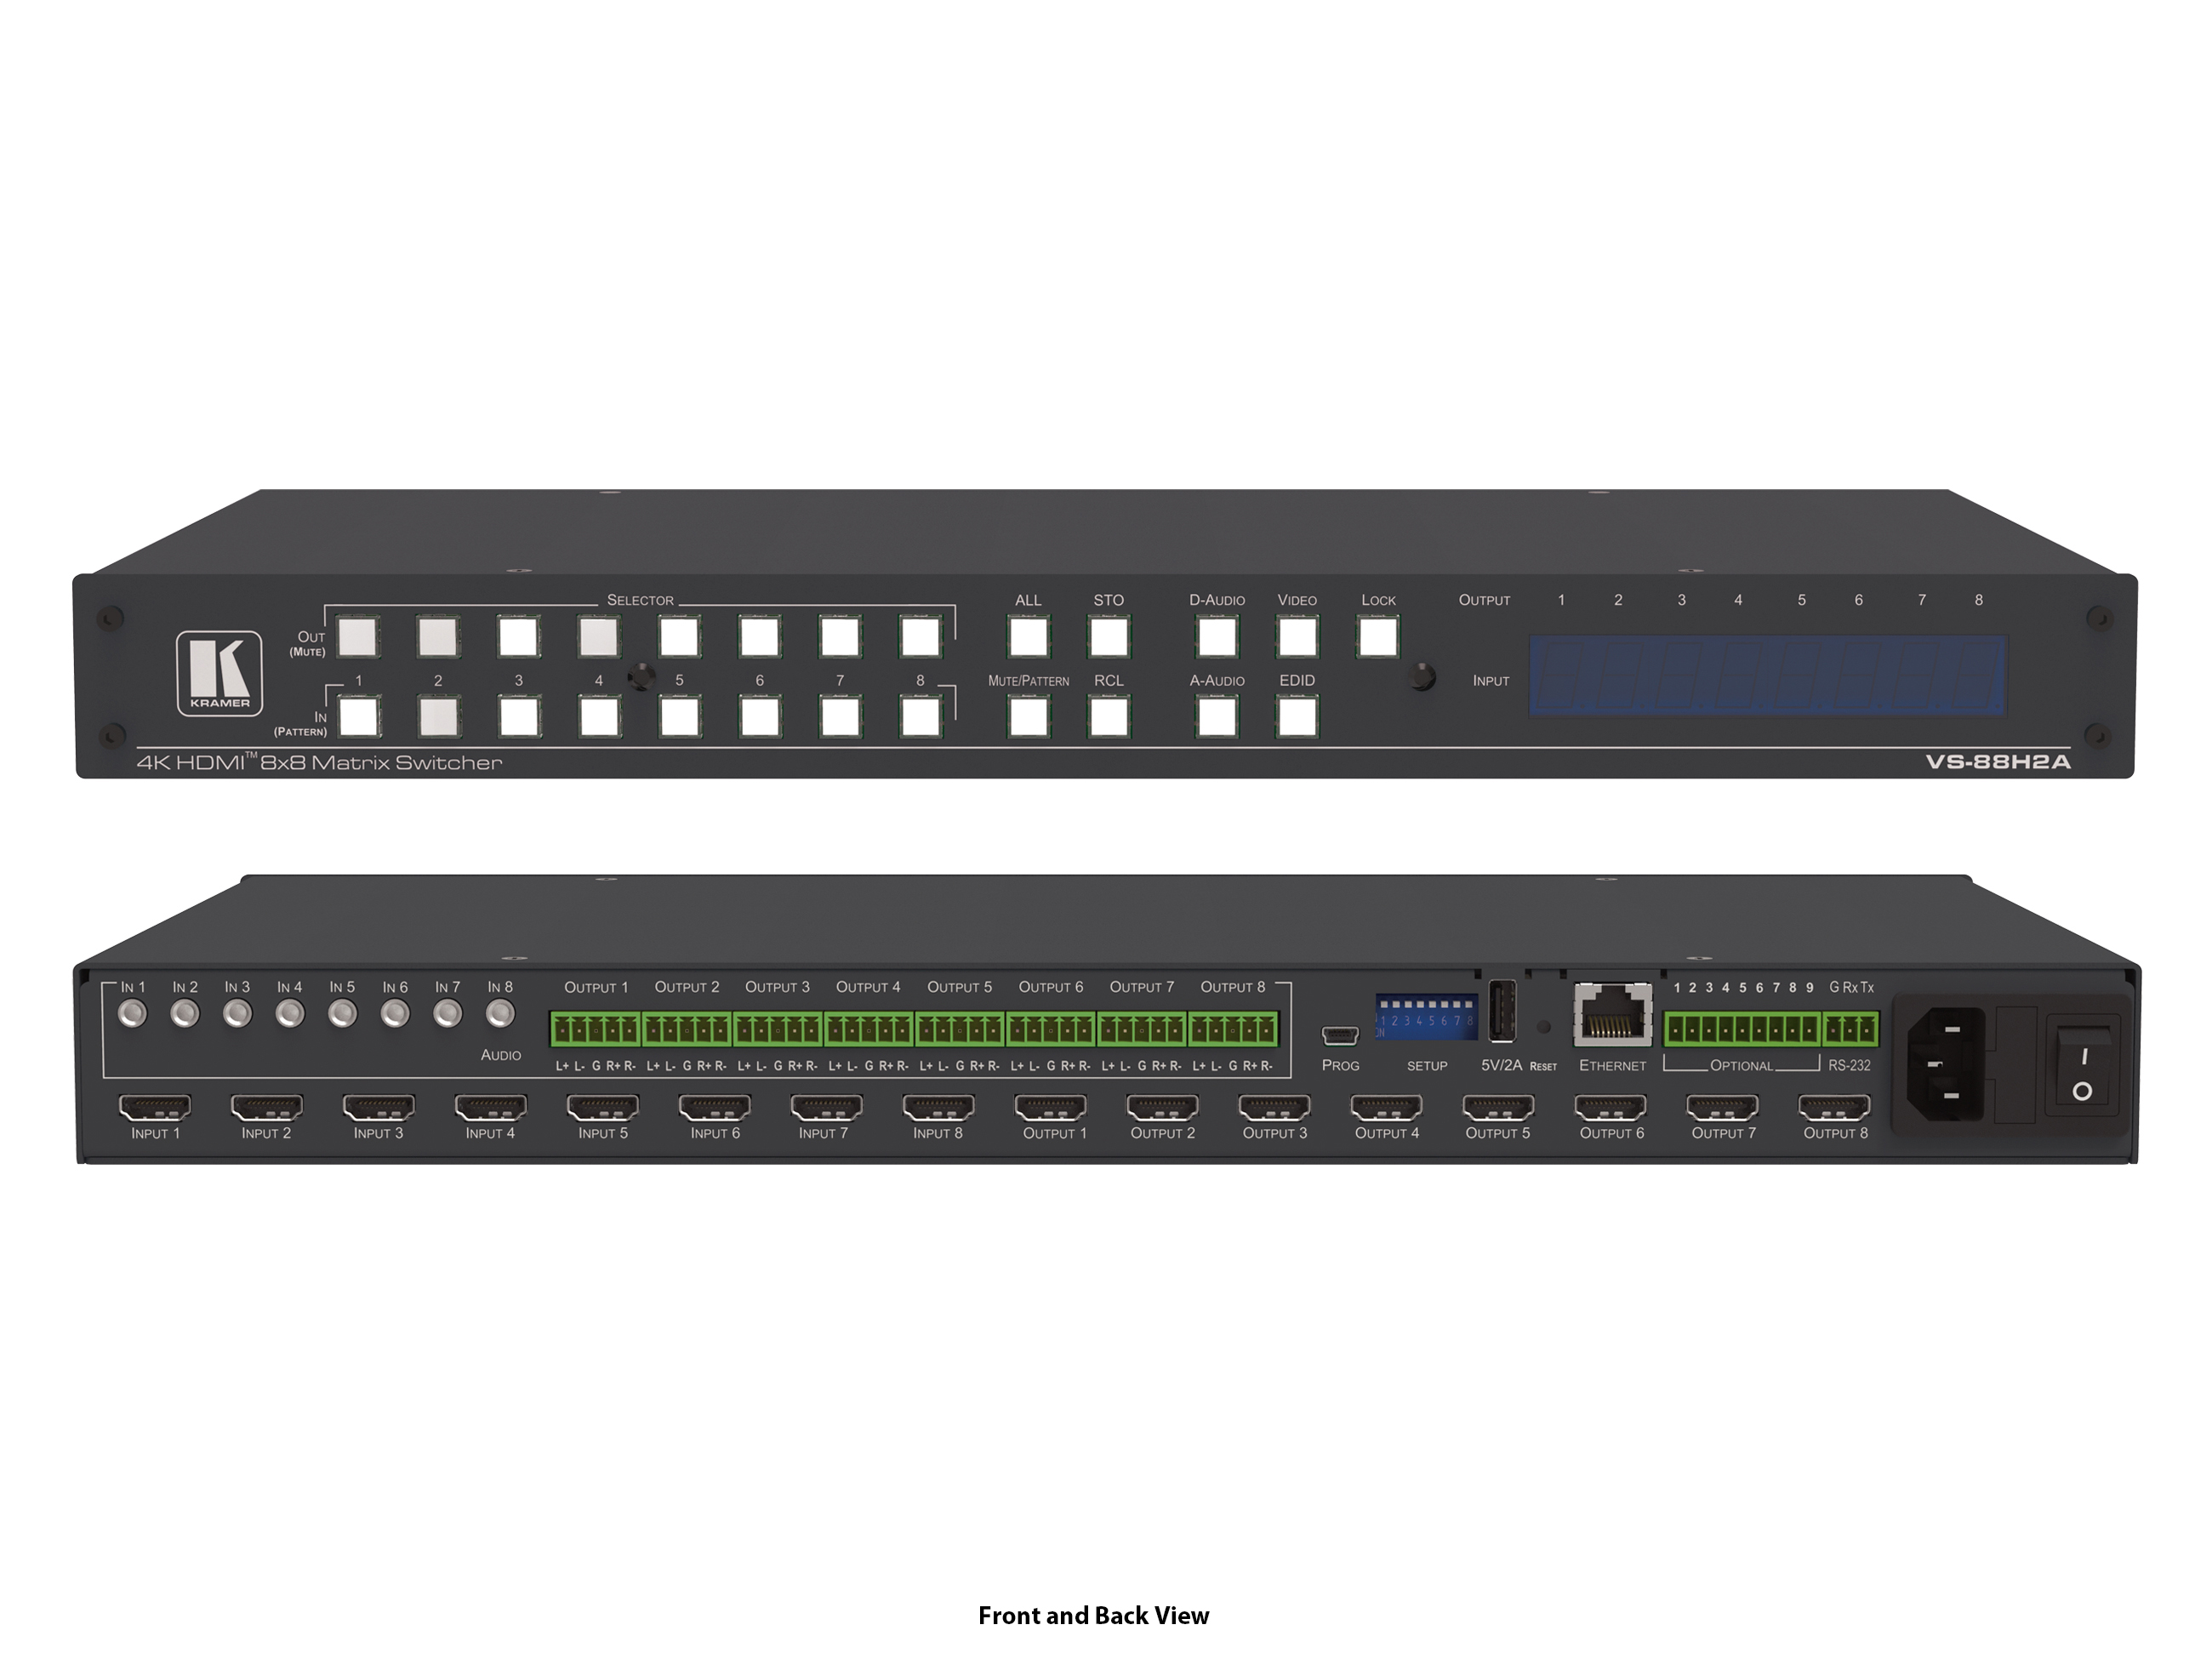 VS-88H2A 8x8 4K HDR HDCP 2.2 HDMI Matrix Switcher with Analog and Digital Audio Routing by Kramer